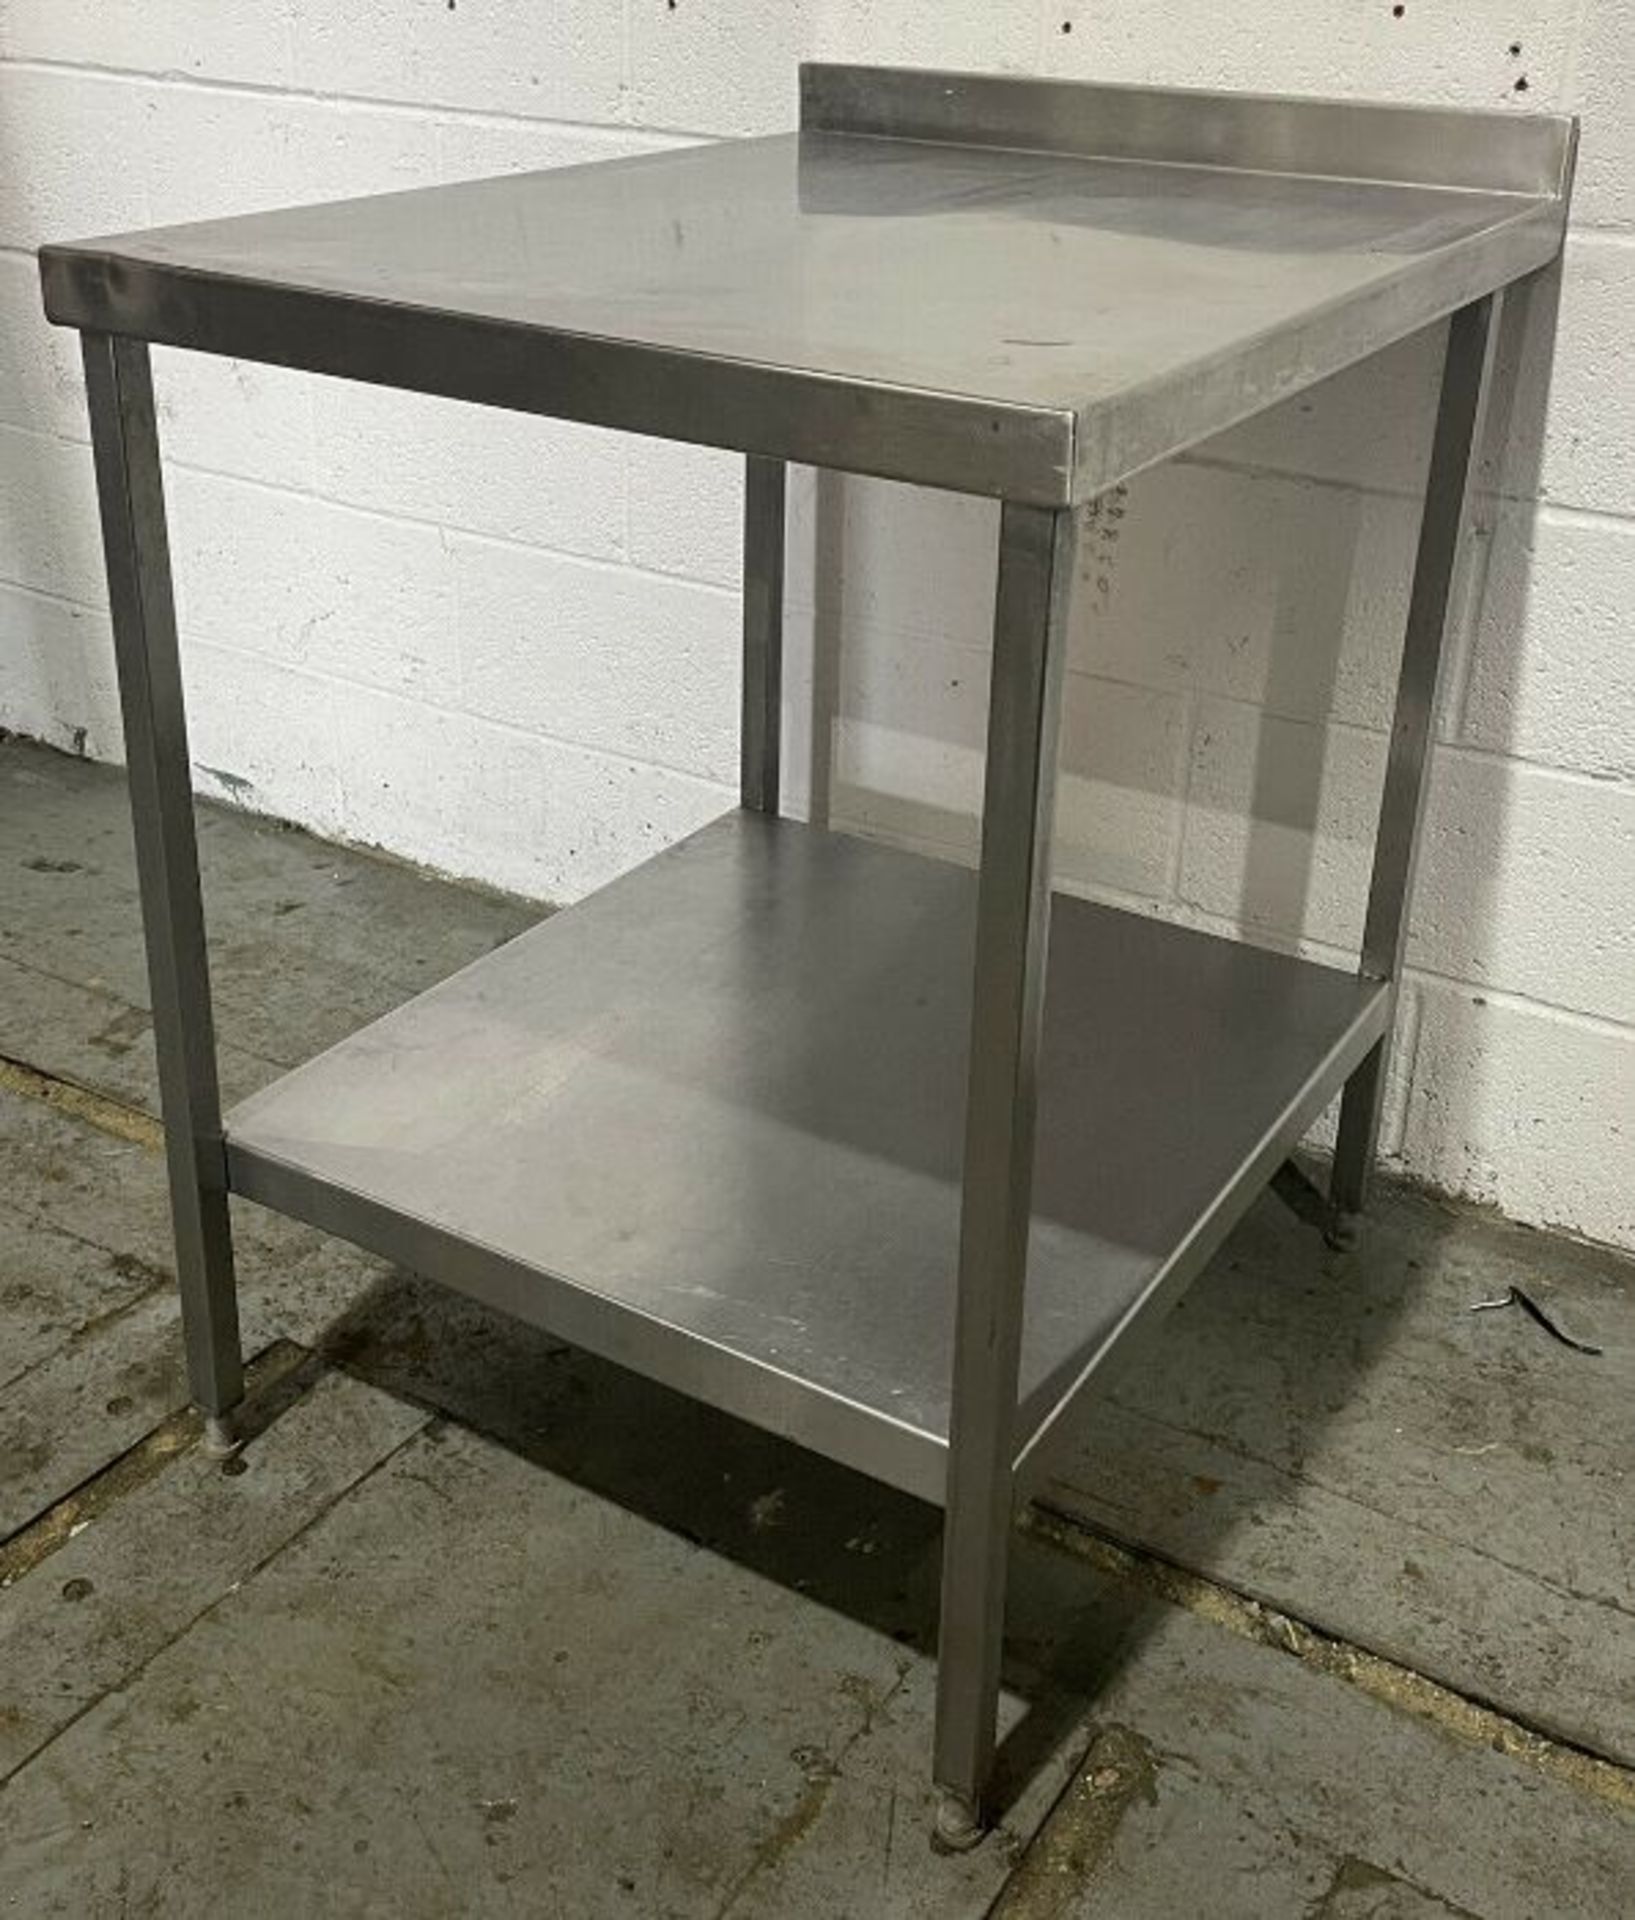 Stainless Steel Preparation Table - Image 3 of 5